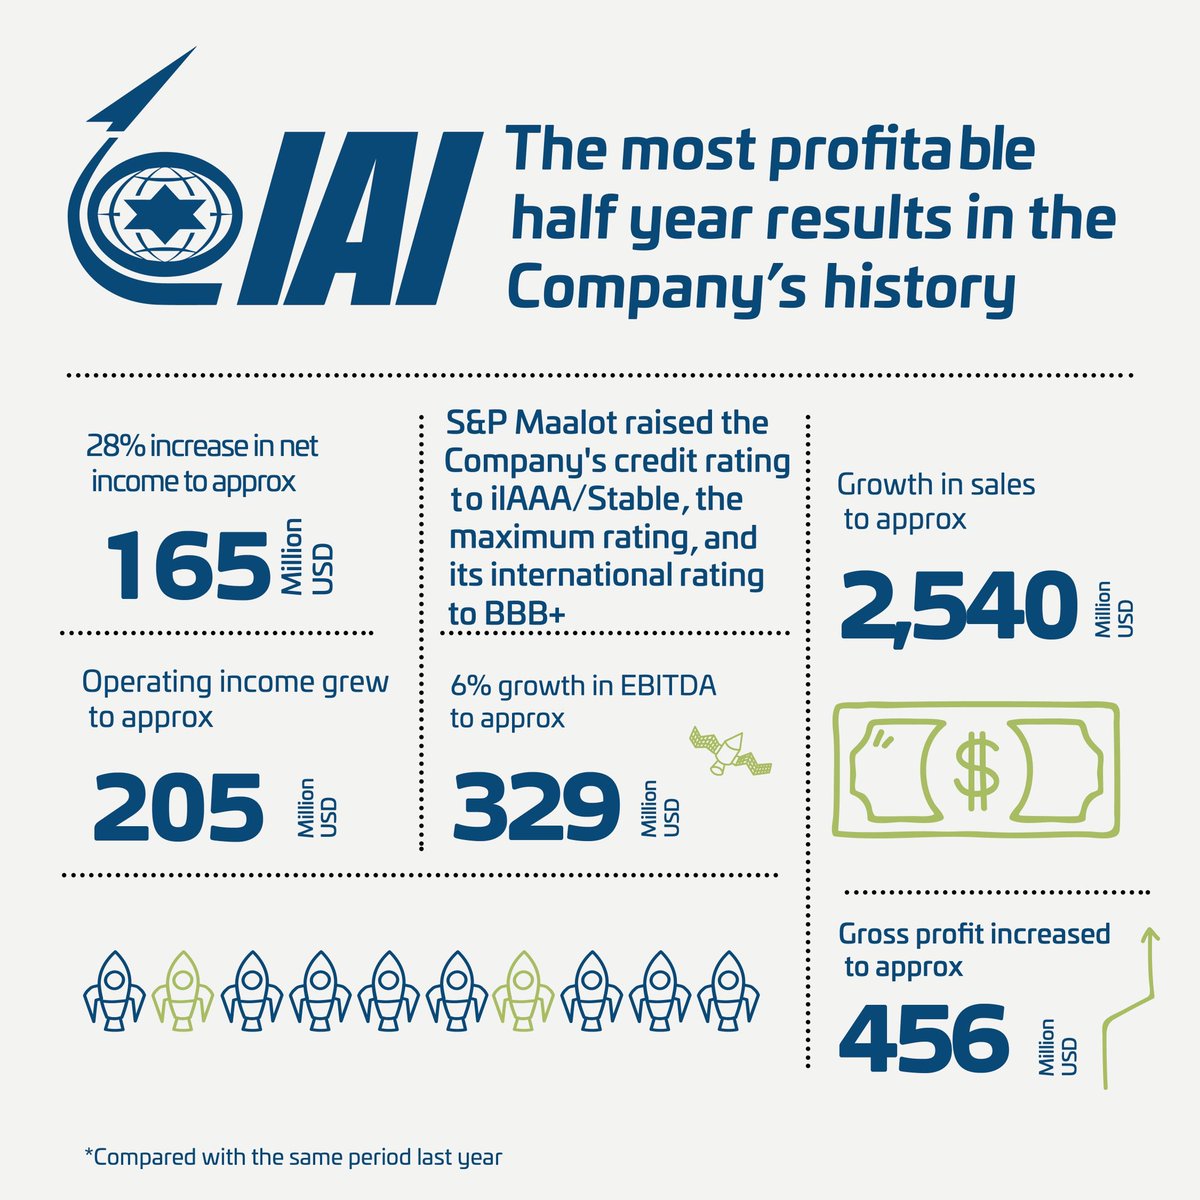 As each quarter or half year comes to an end, IAI manages to break its own records, presenting excellent business results that are a source of pride for us all. These achievements are the result of the technologies and innovation led by the Company’s engineers.   Check it out: